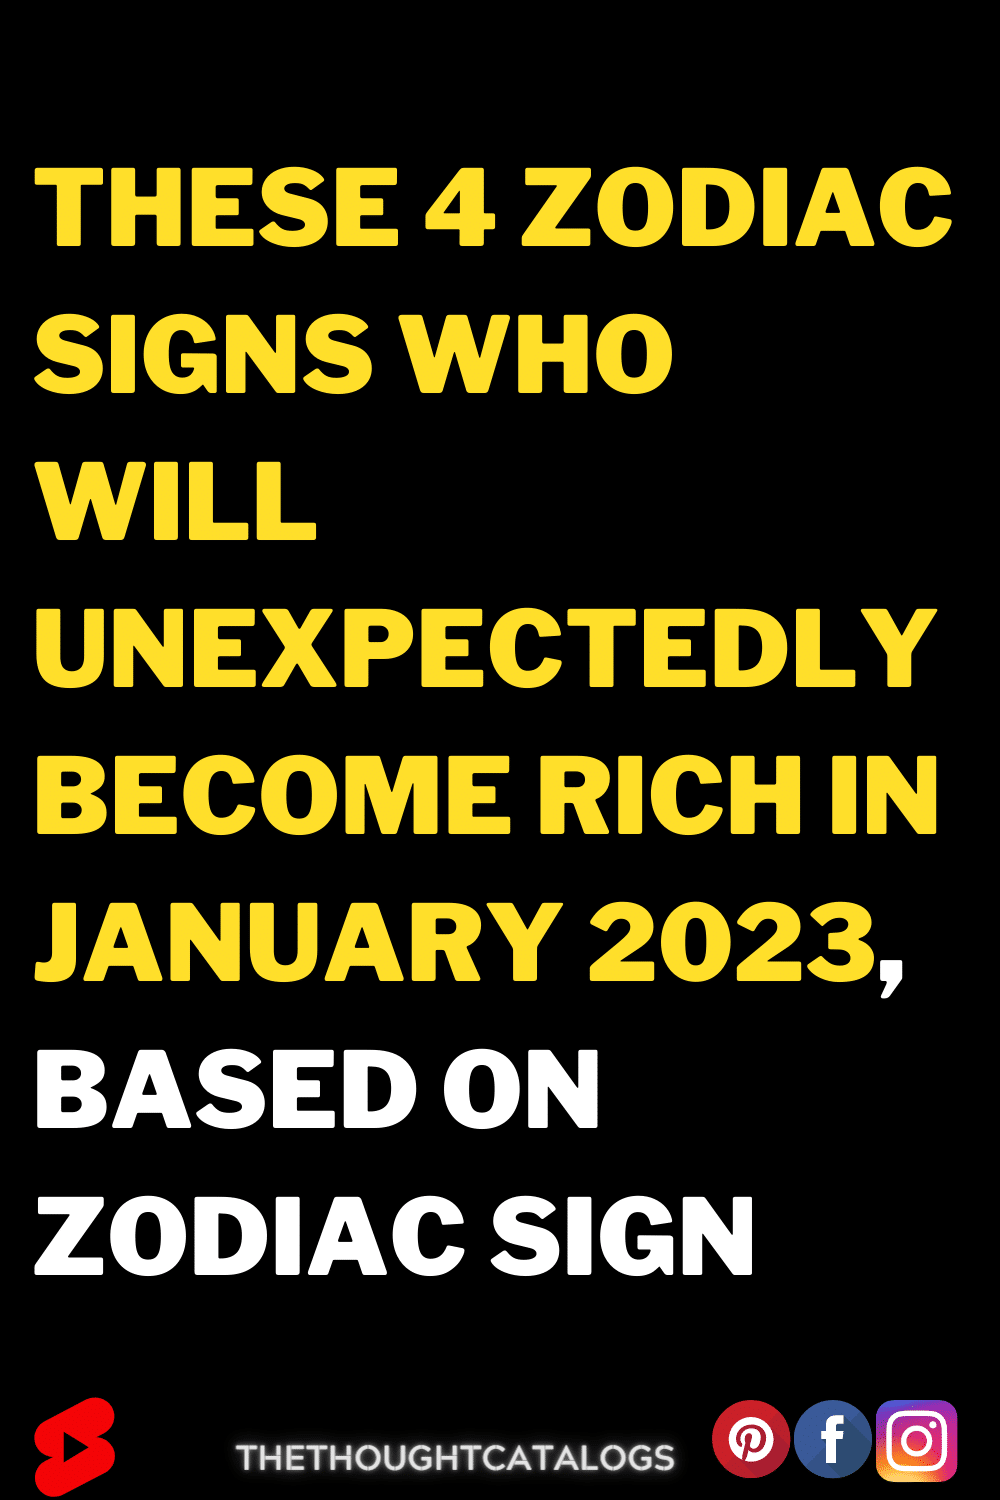 These 4 Zodiac Signs Who Will Unexpectedly Become Rich In January 2023 ...